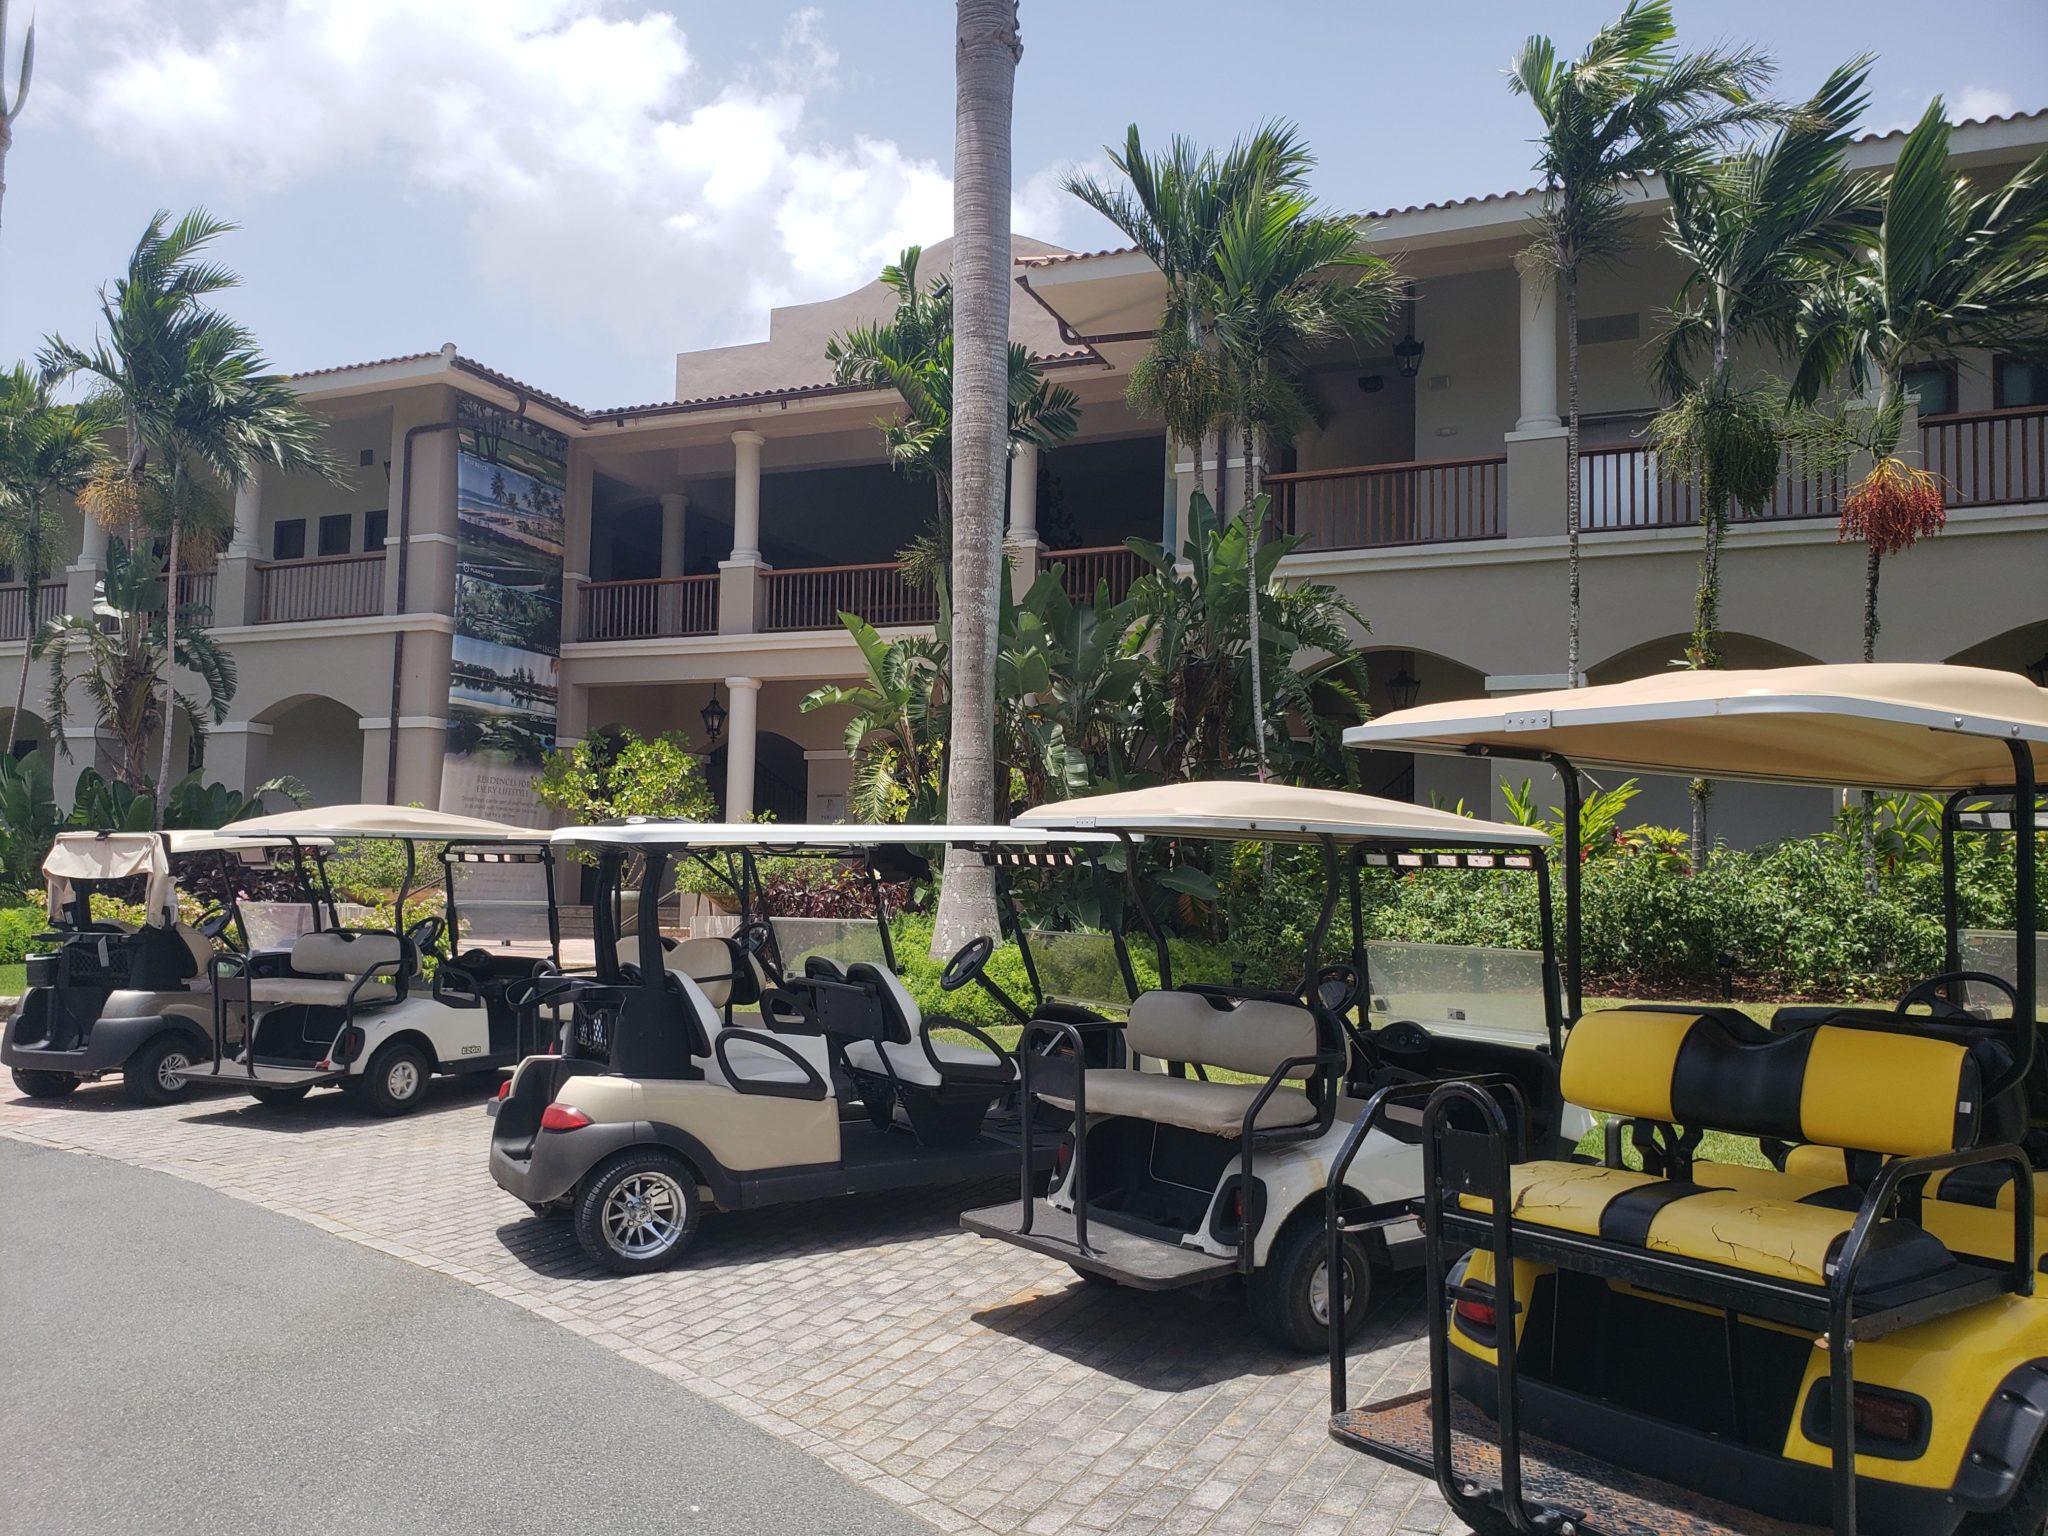 a group of golf carts parked in front of a building